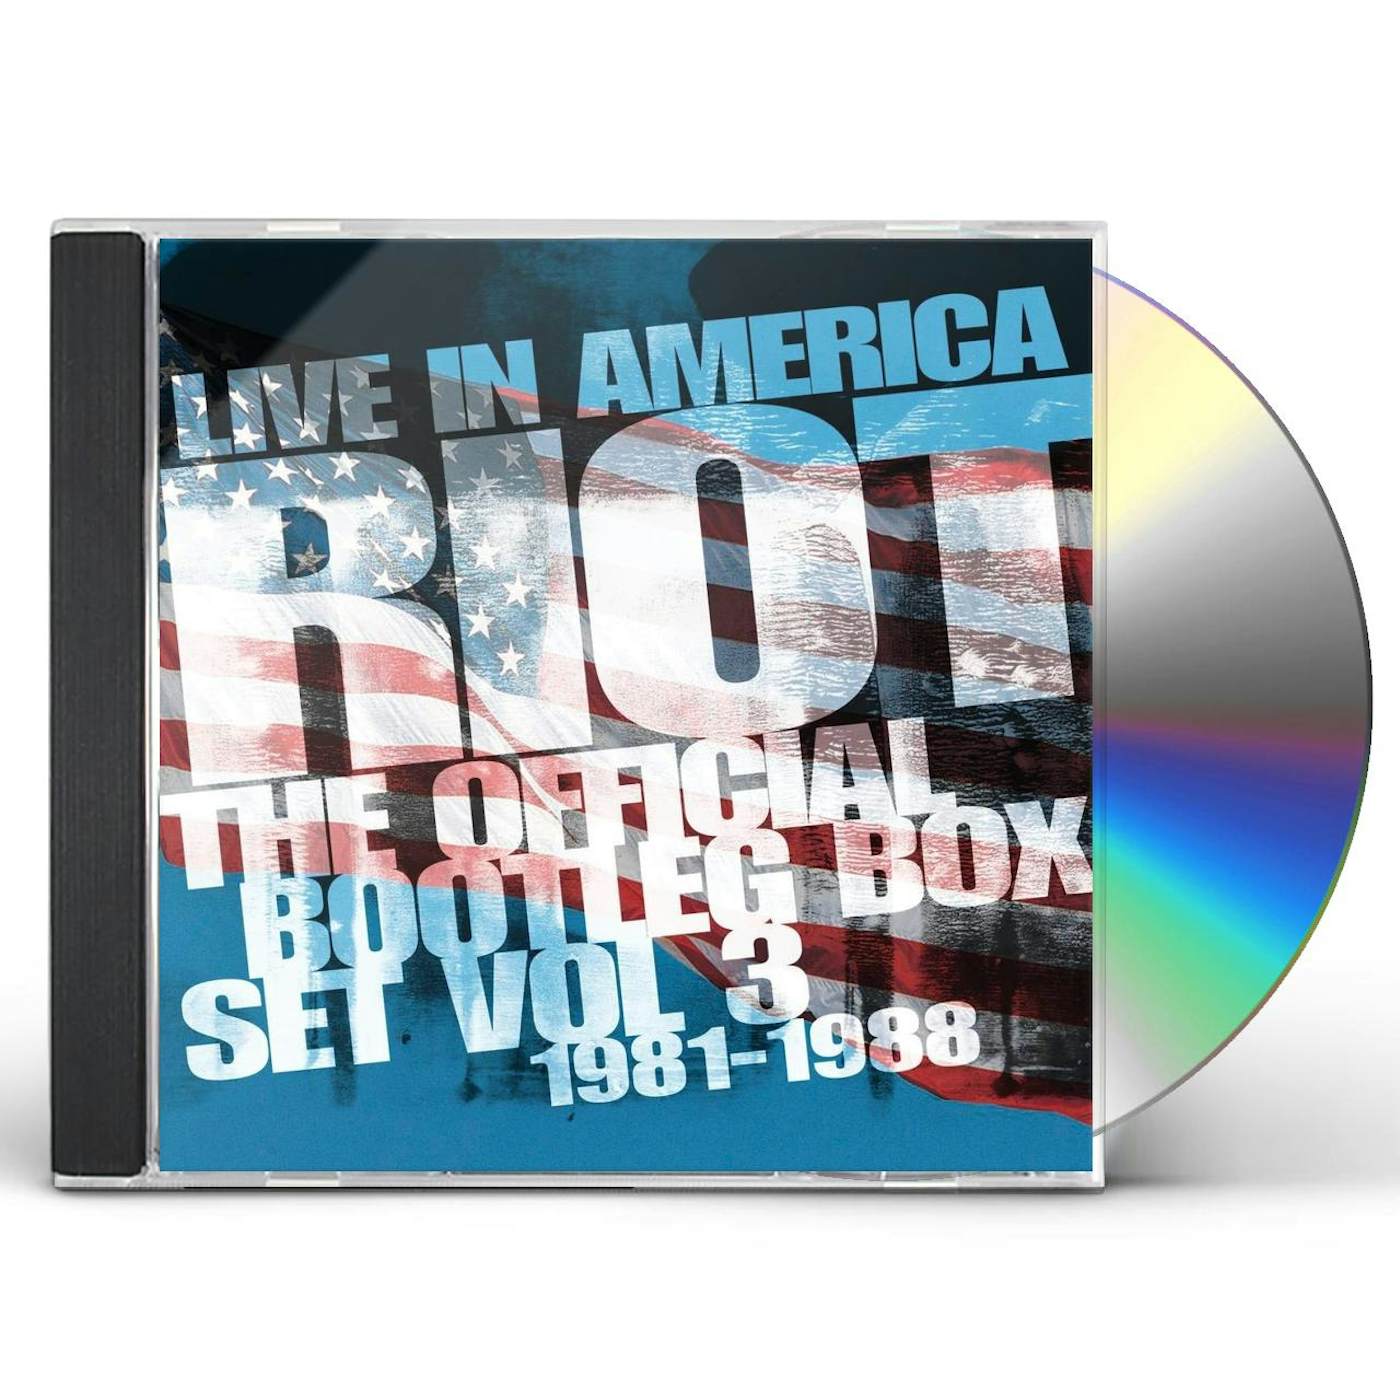 Riot LIVE IN AMERICA: OFFICIAL BOOTLEG BOX SET VOL 3 CD